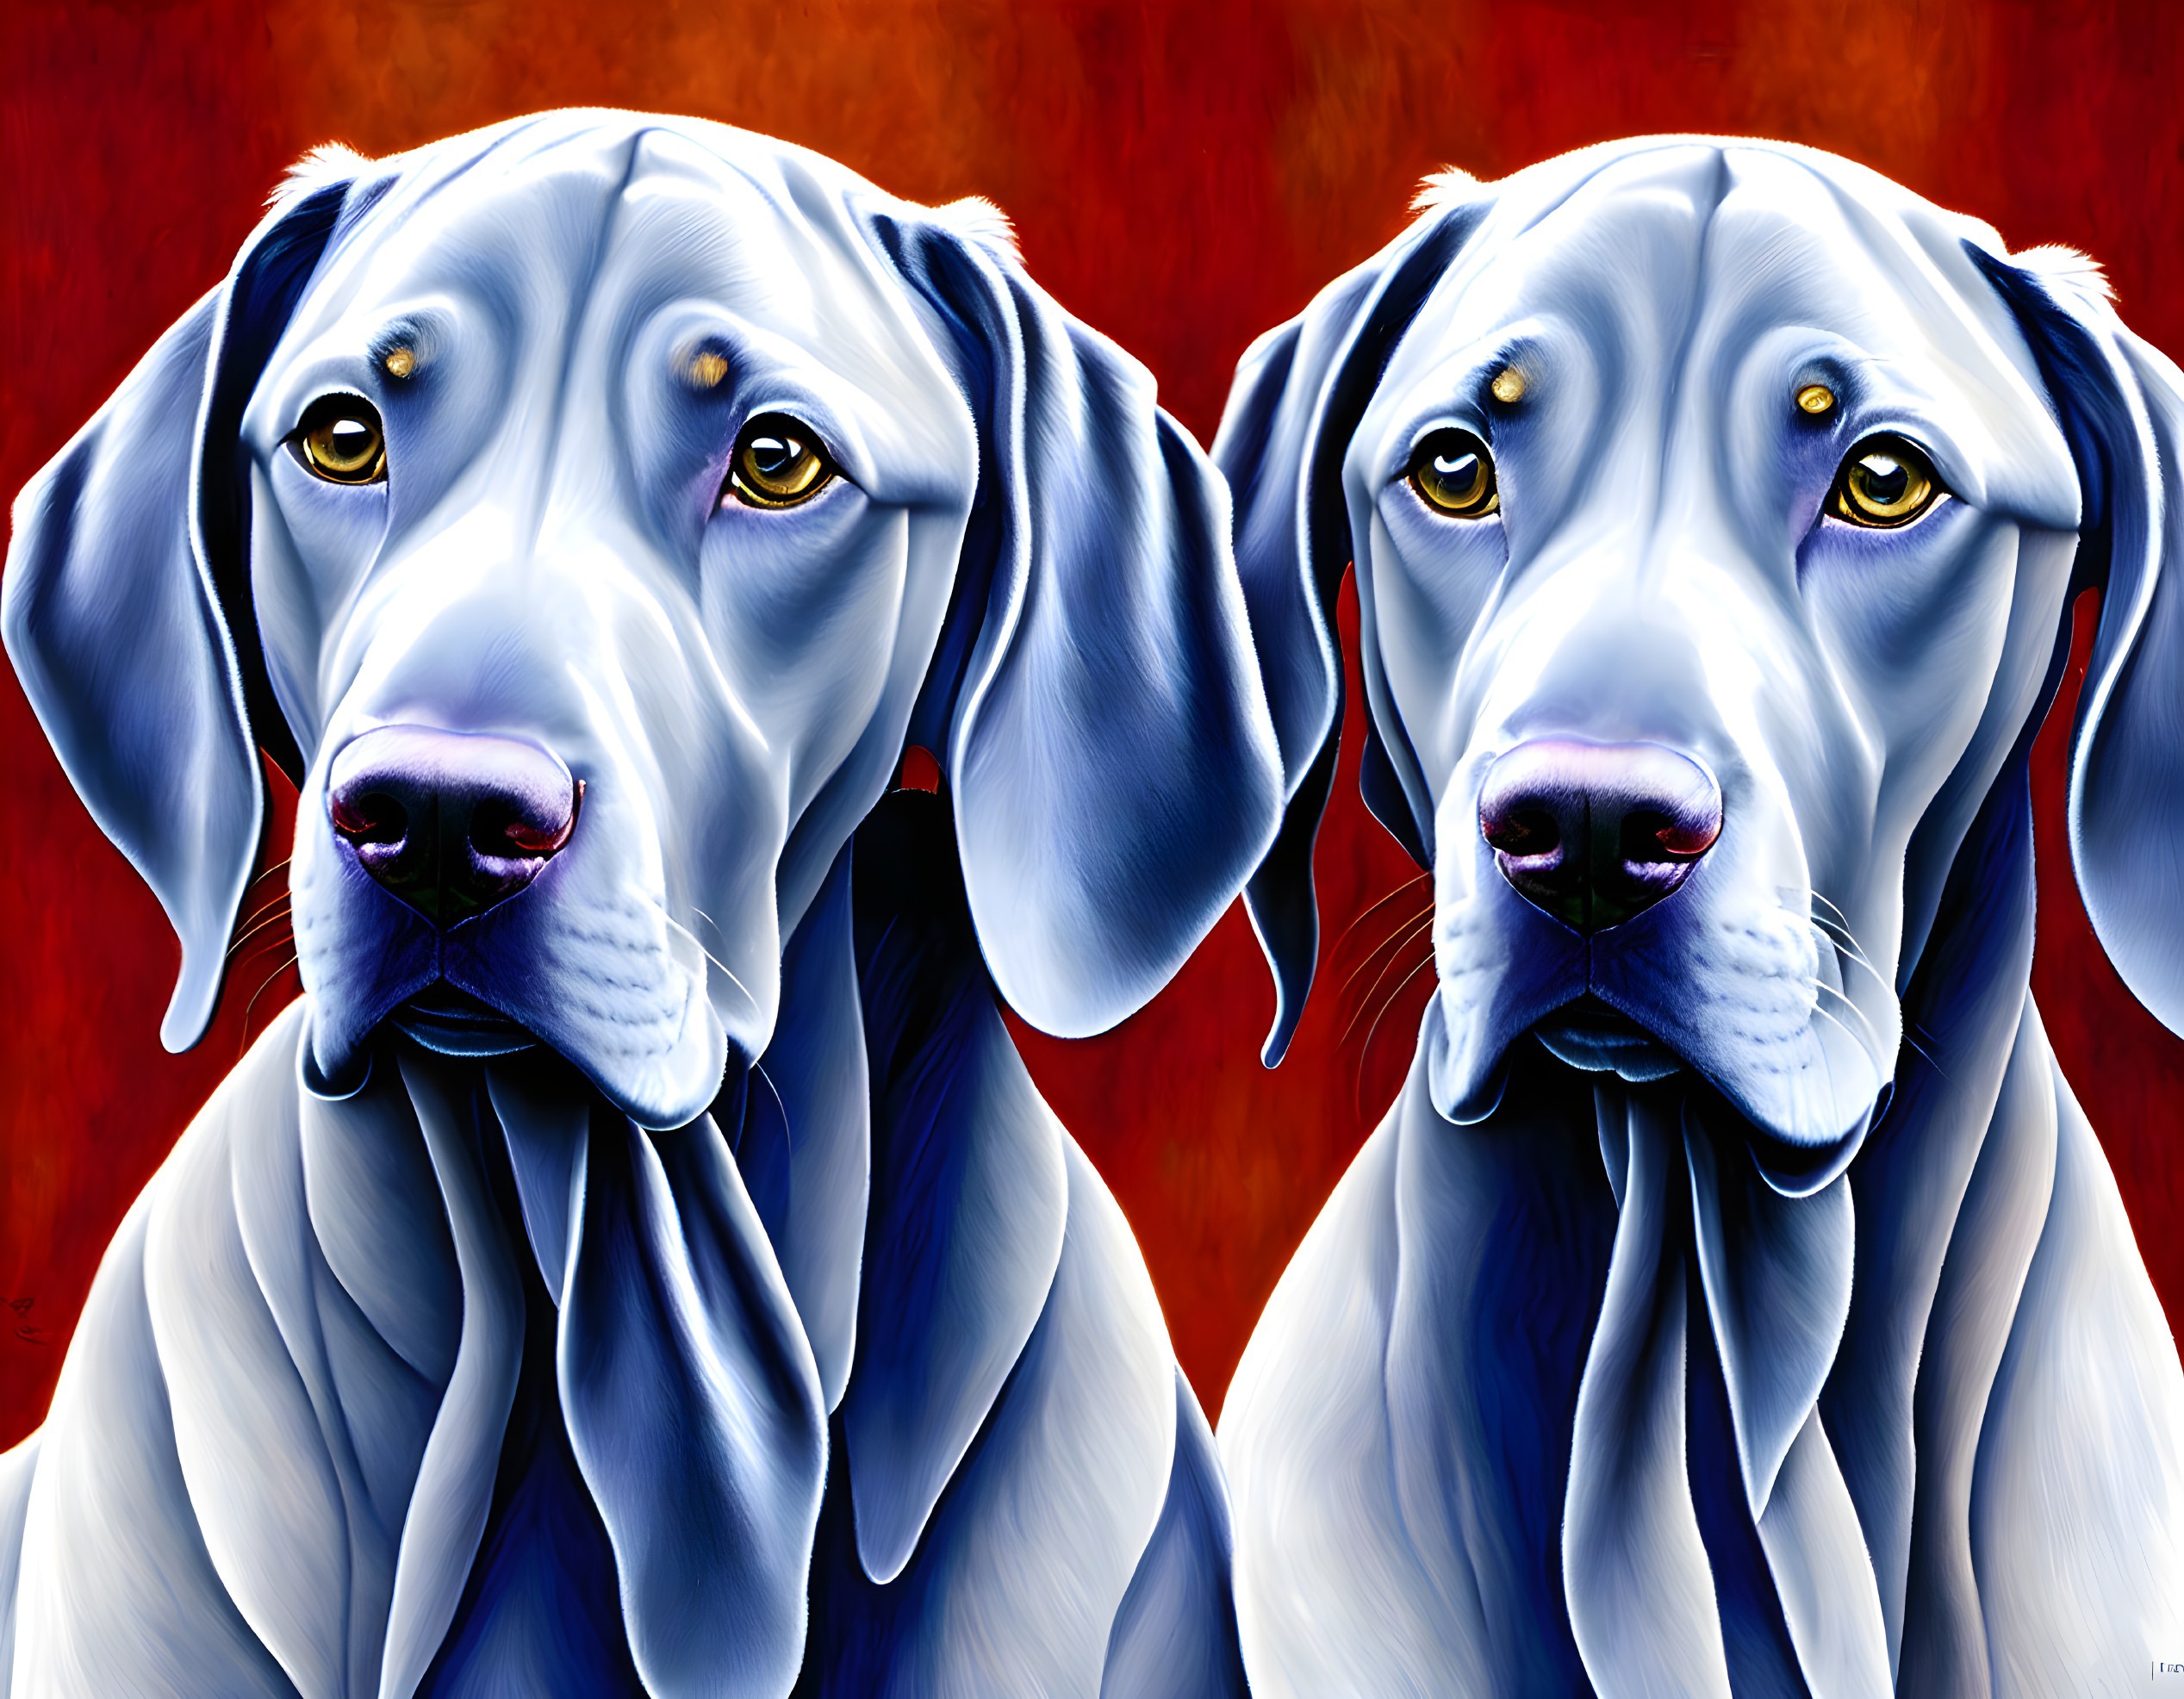 Vibrant Weimaraner dogs with glossy blue coats on red and orange background